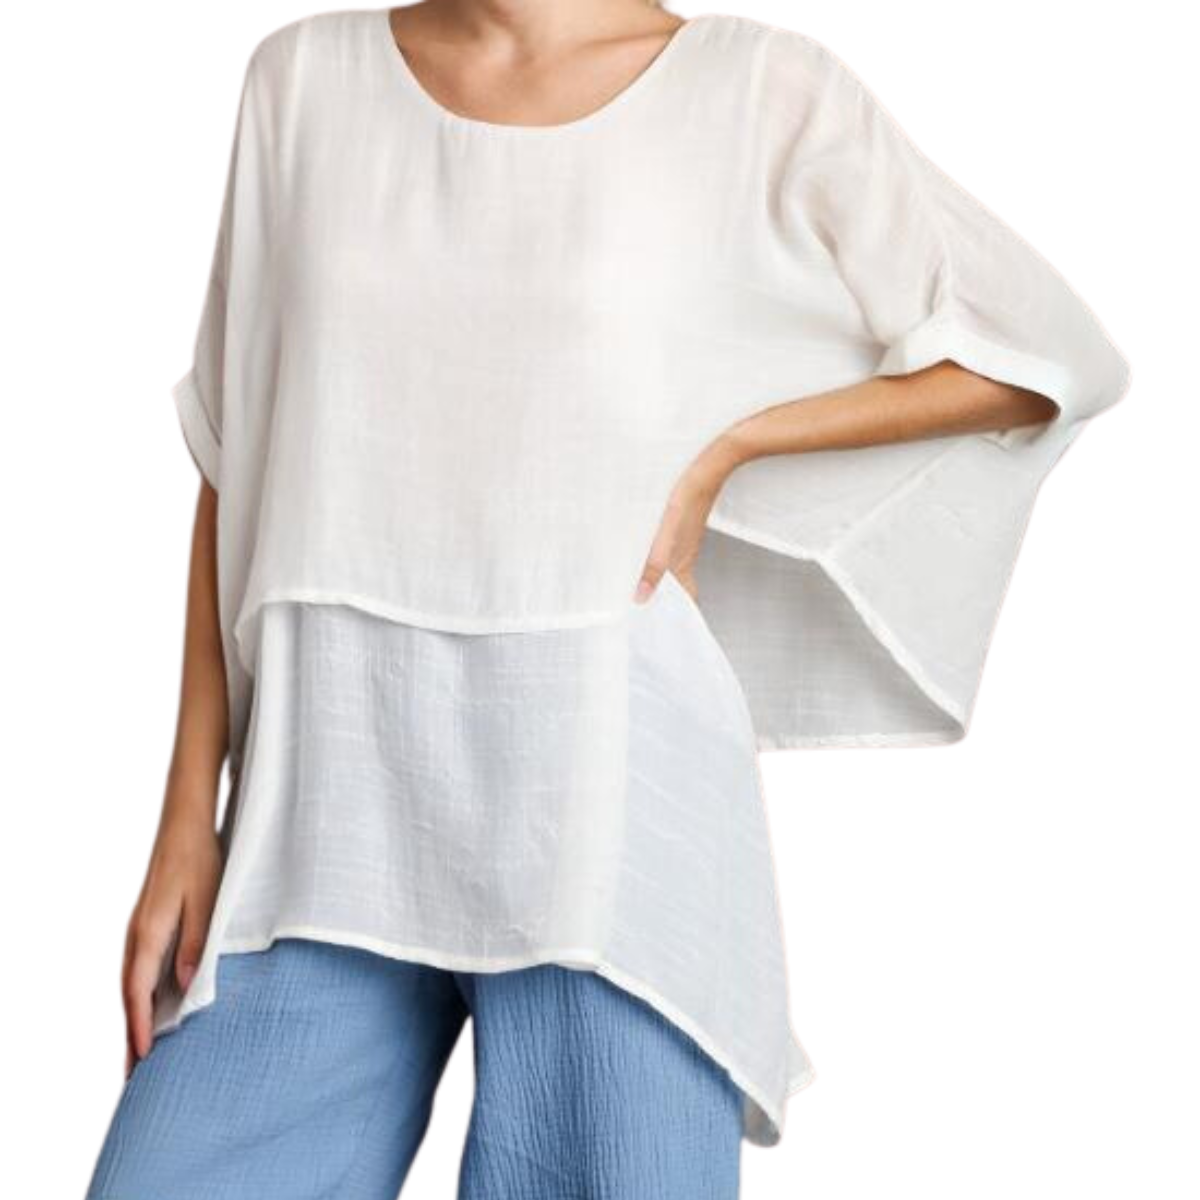 A person wearing a white, Cuffed 1/2 Sleeve Layered Tunic by Umgee with an asymmetrical hem, paired with blue jeans.